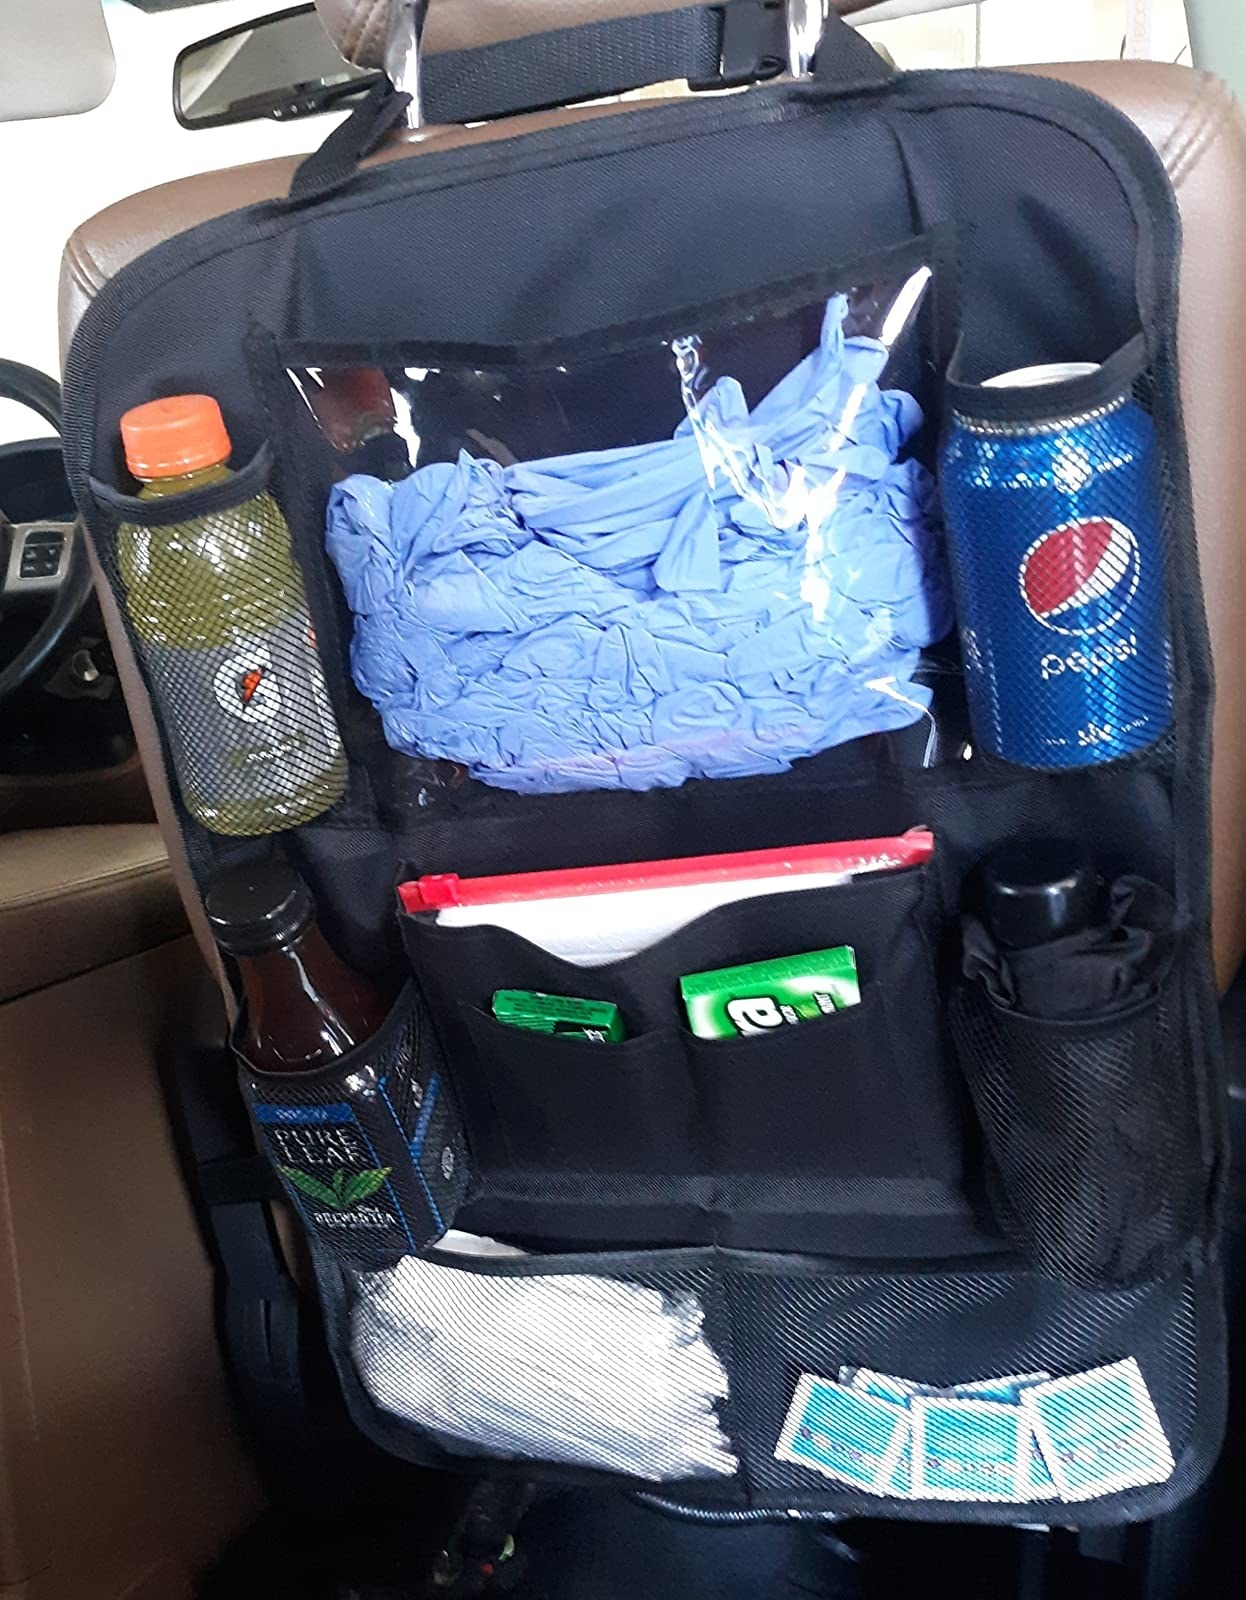 Reviewer image of backseat organizer filled with drinks, disposable gloves and other items